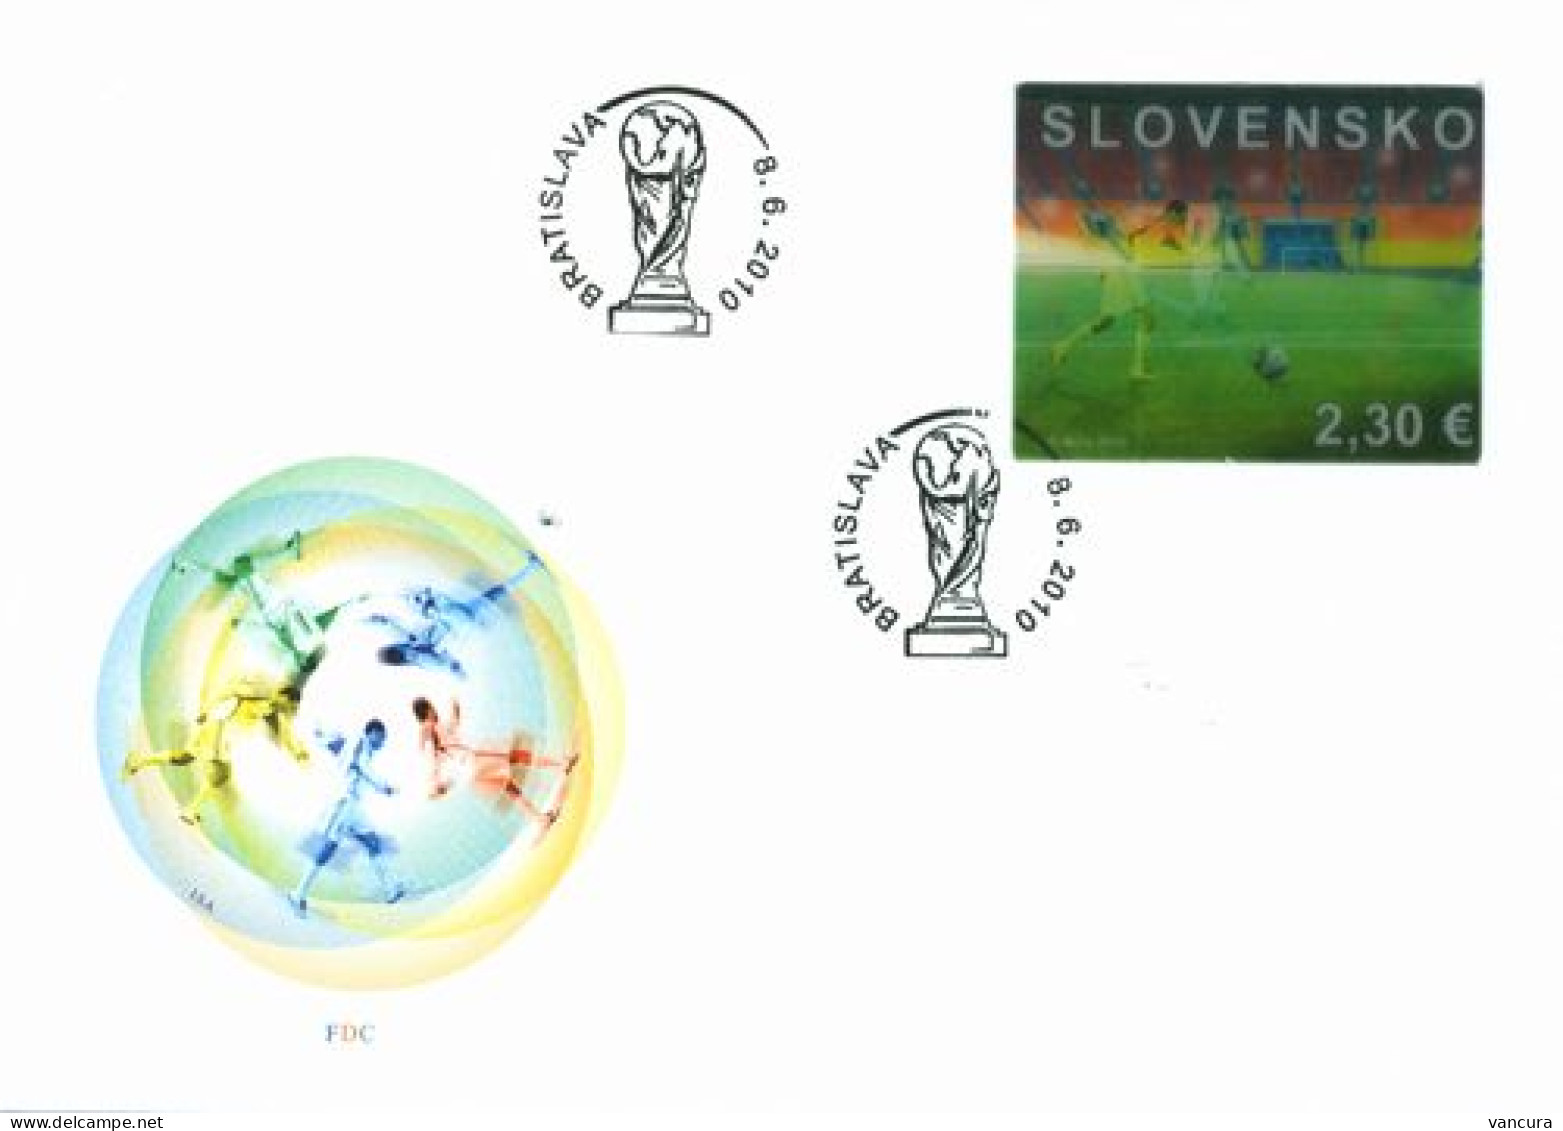 FDC 475 Slovakia In Football World Cup Final In South Africa 2010 - 2010 – South Africa